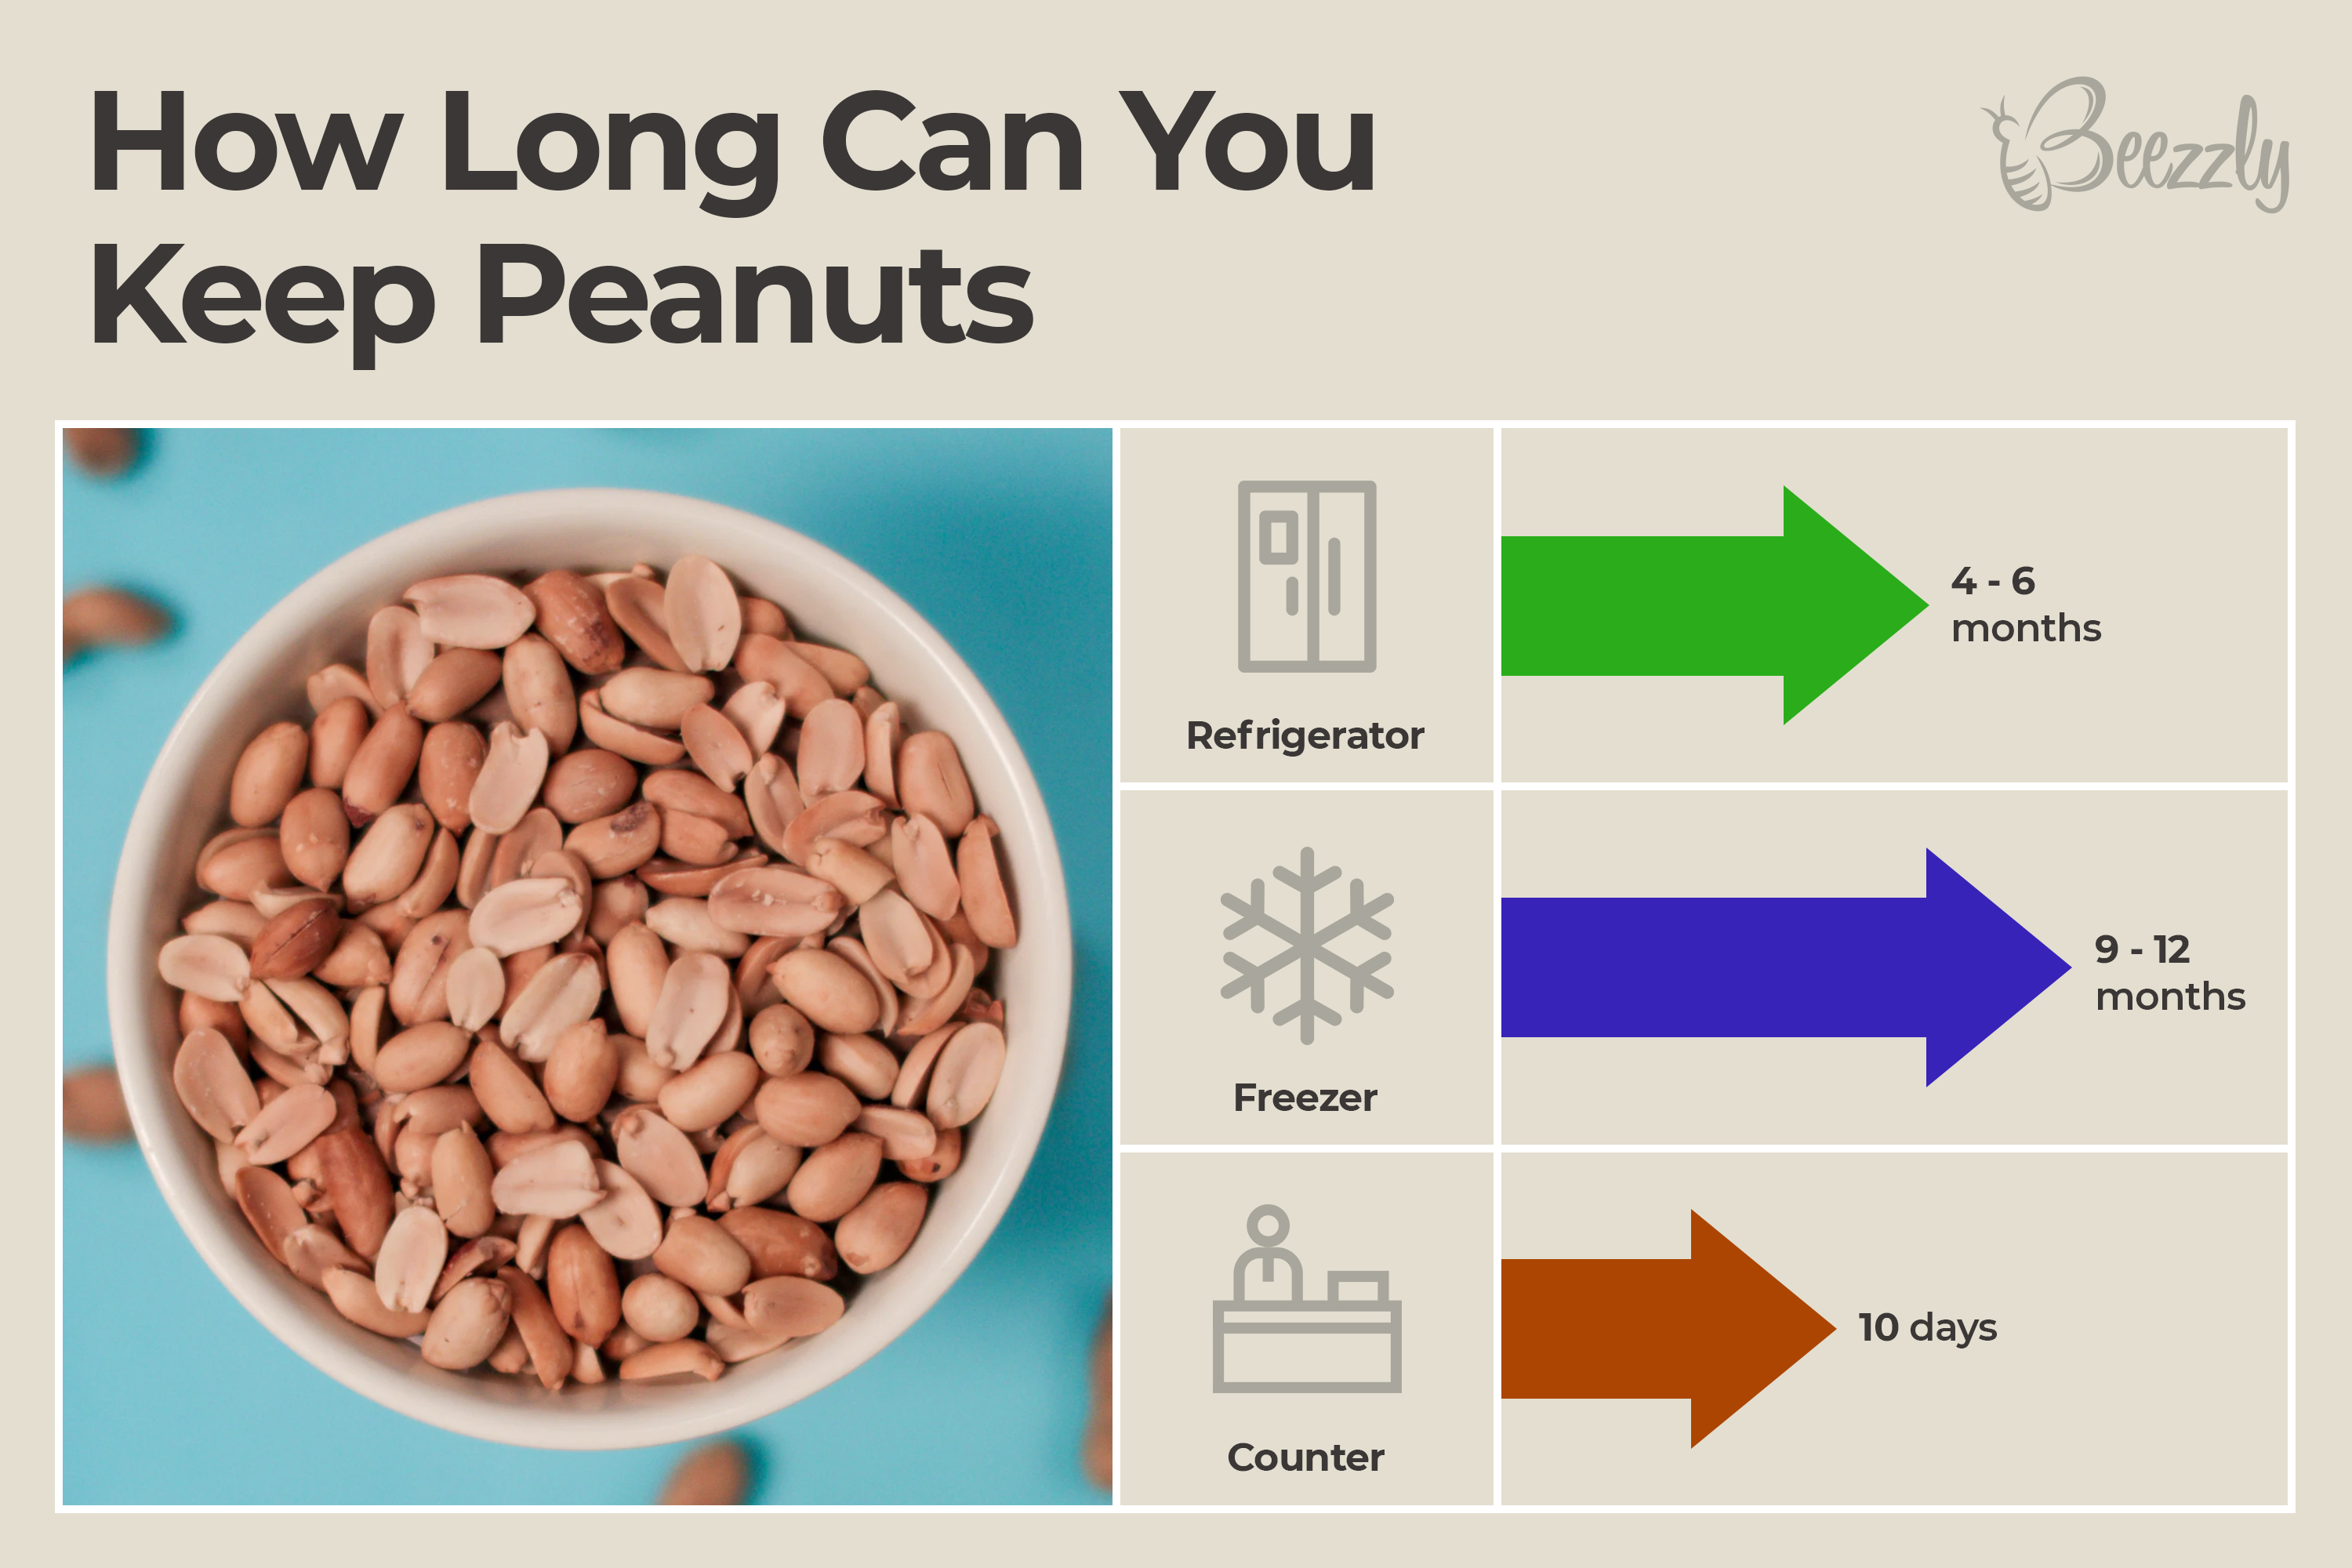 How long can you keep peanuts